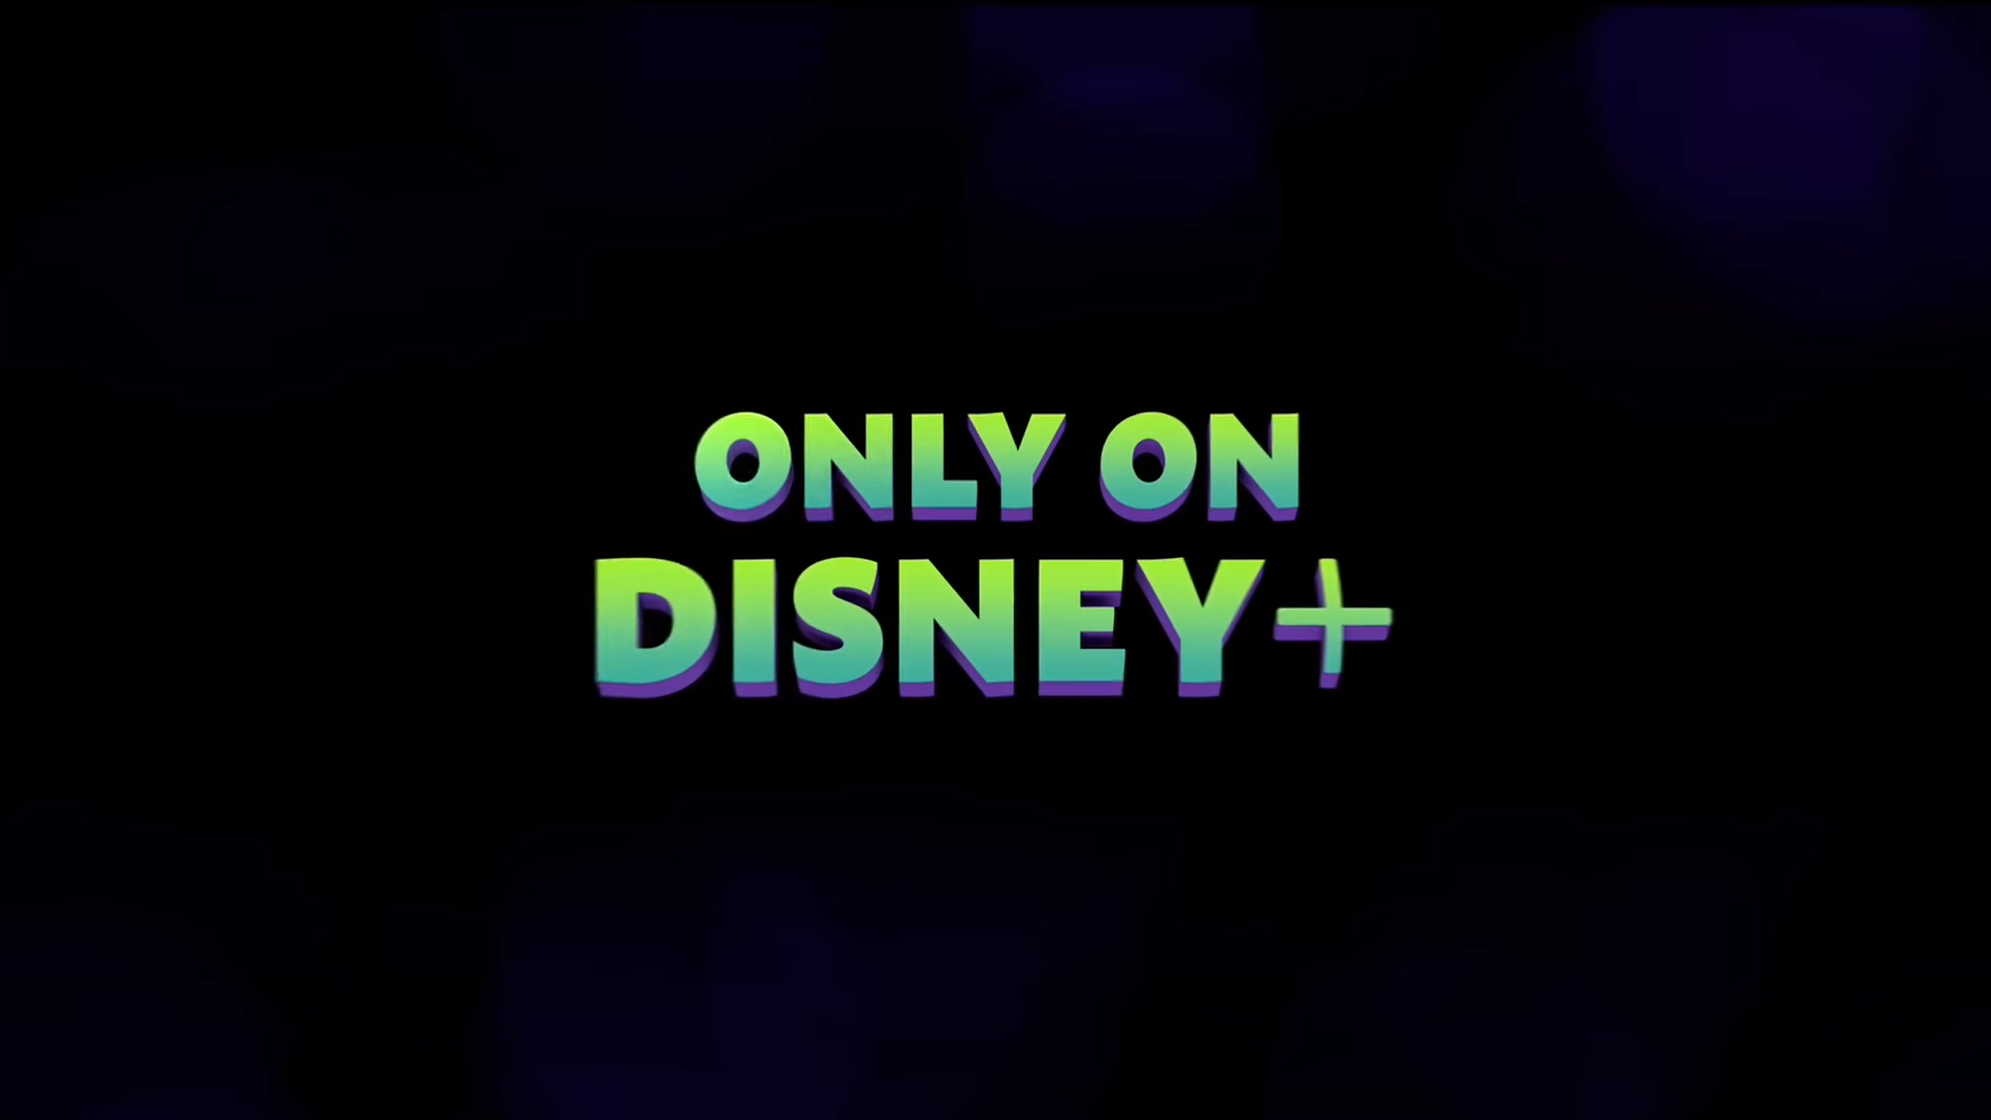 New Disney Show Zootopia+ Finally Gets Trailer 2 Days Before Release